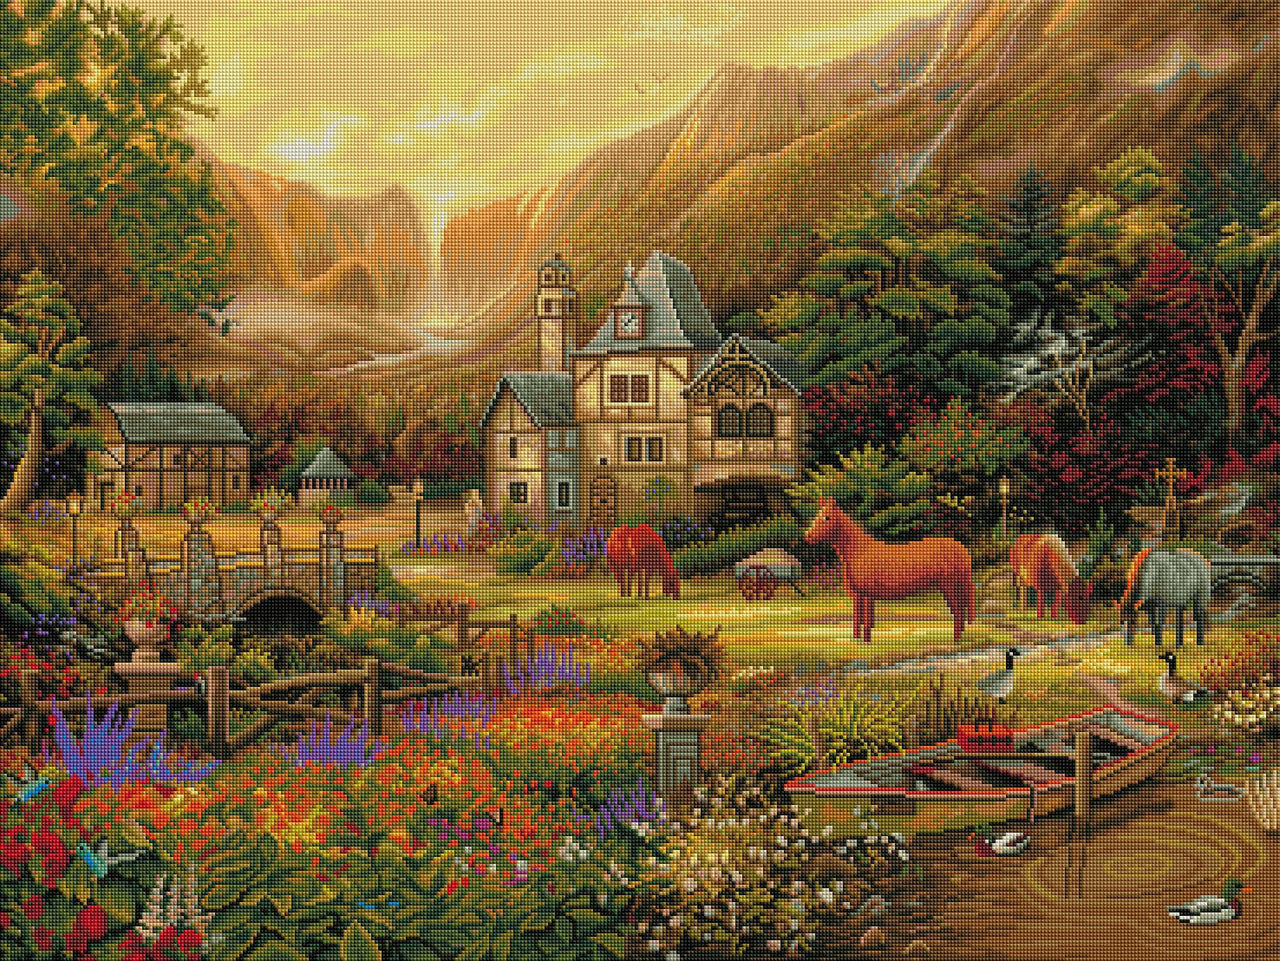 Diamond Painting The Golden Valley 36.6" x 27.6″ (93cm x 70cm) / Square with 53 Colors including 2 ABs / 102,213